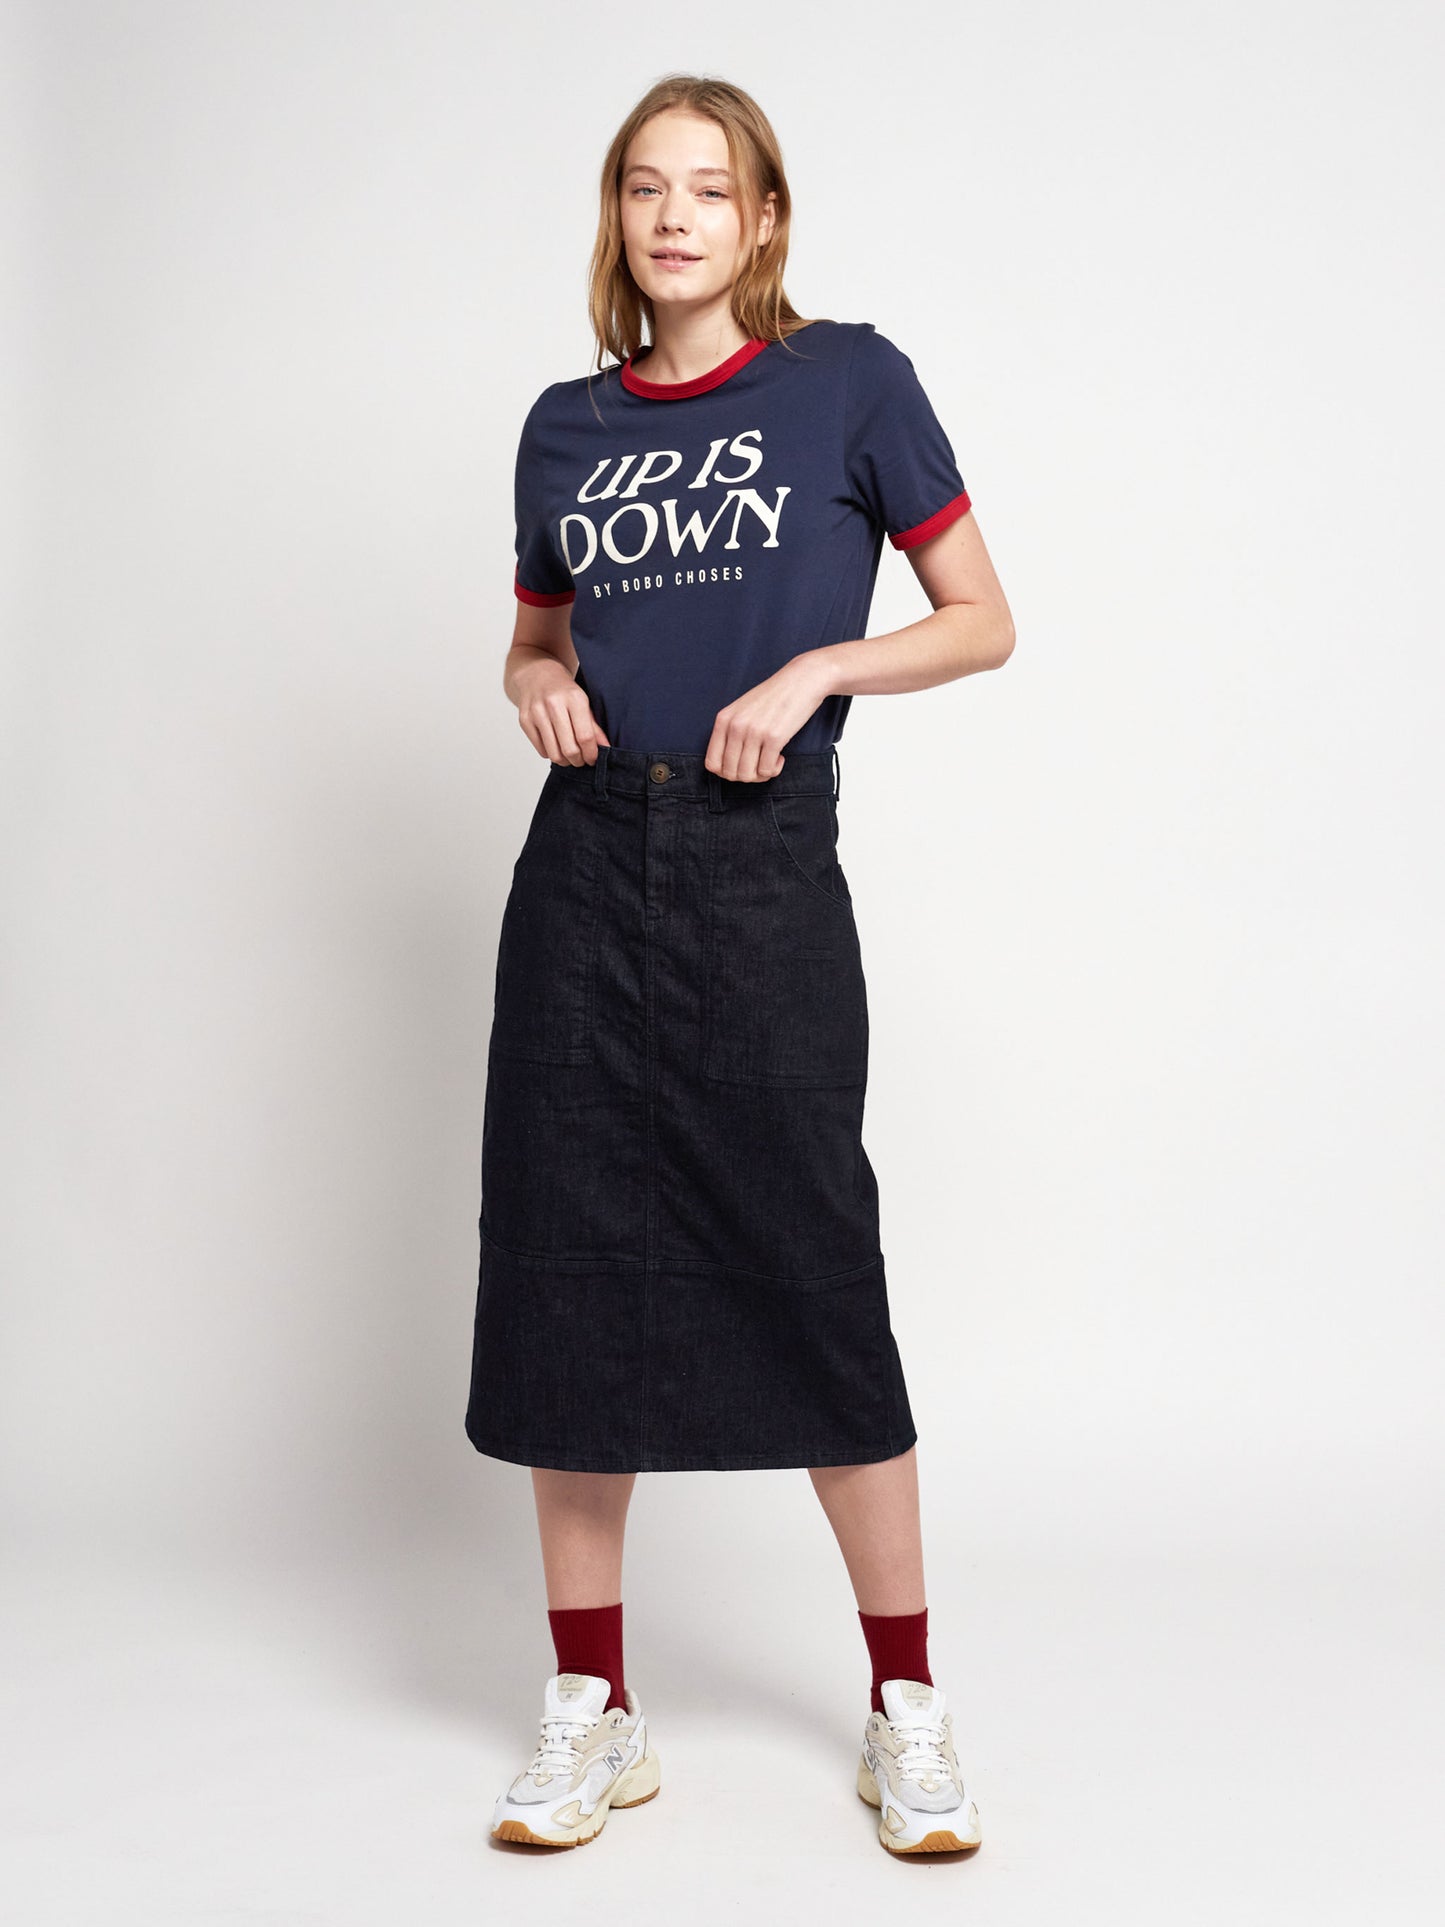 Up Is Down short sleeve T-shirt